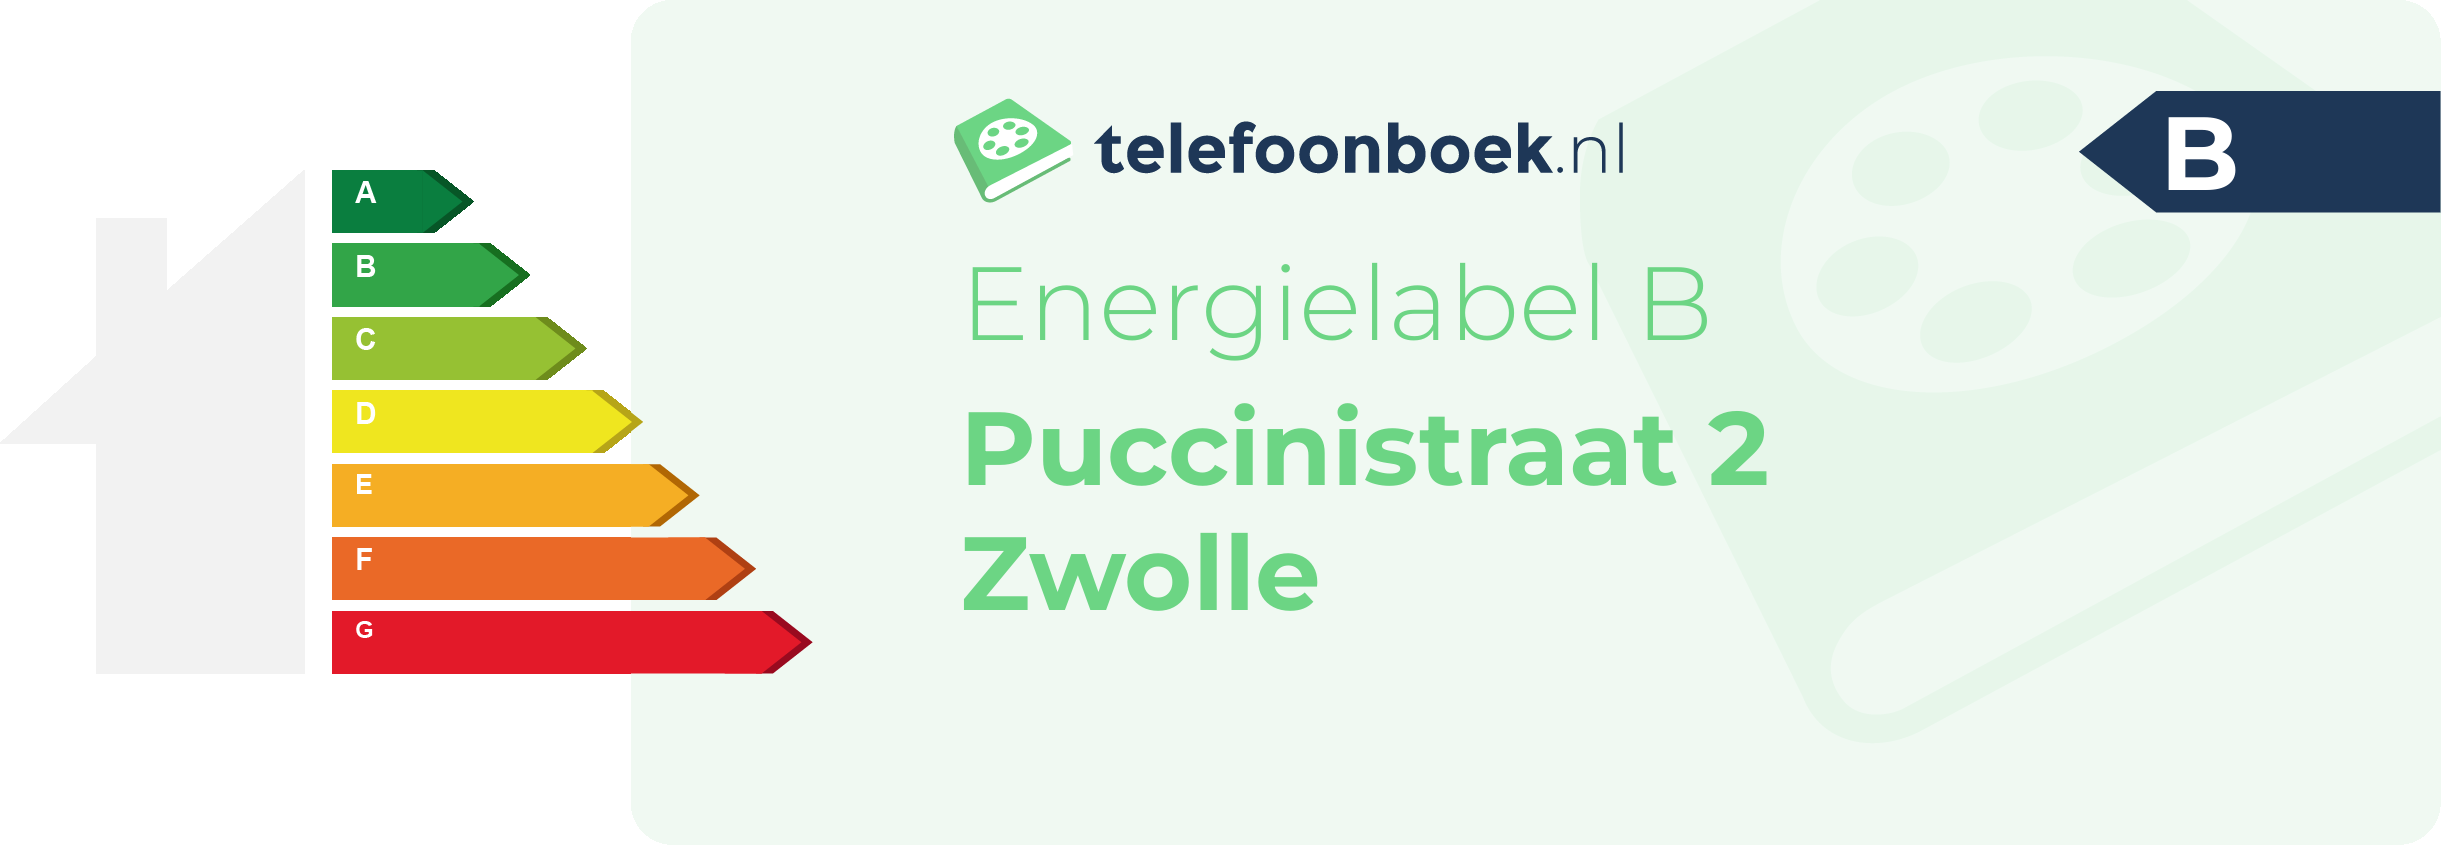 Energielabel Puccinistraat 2 Zwolle